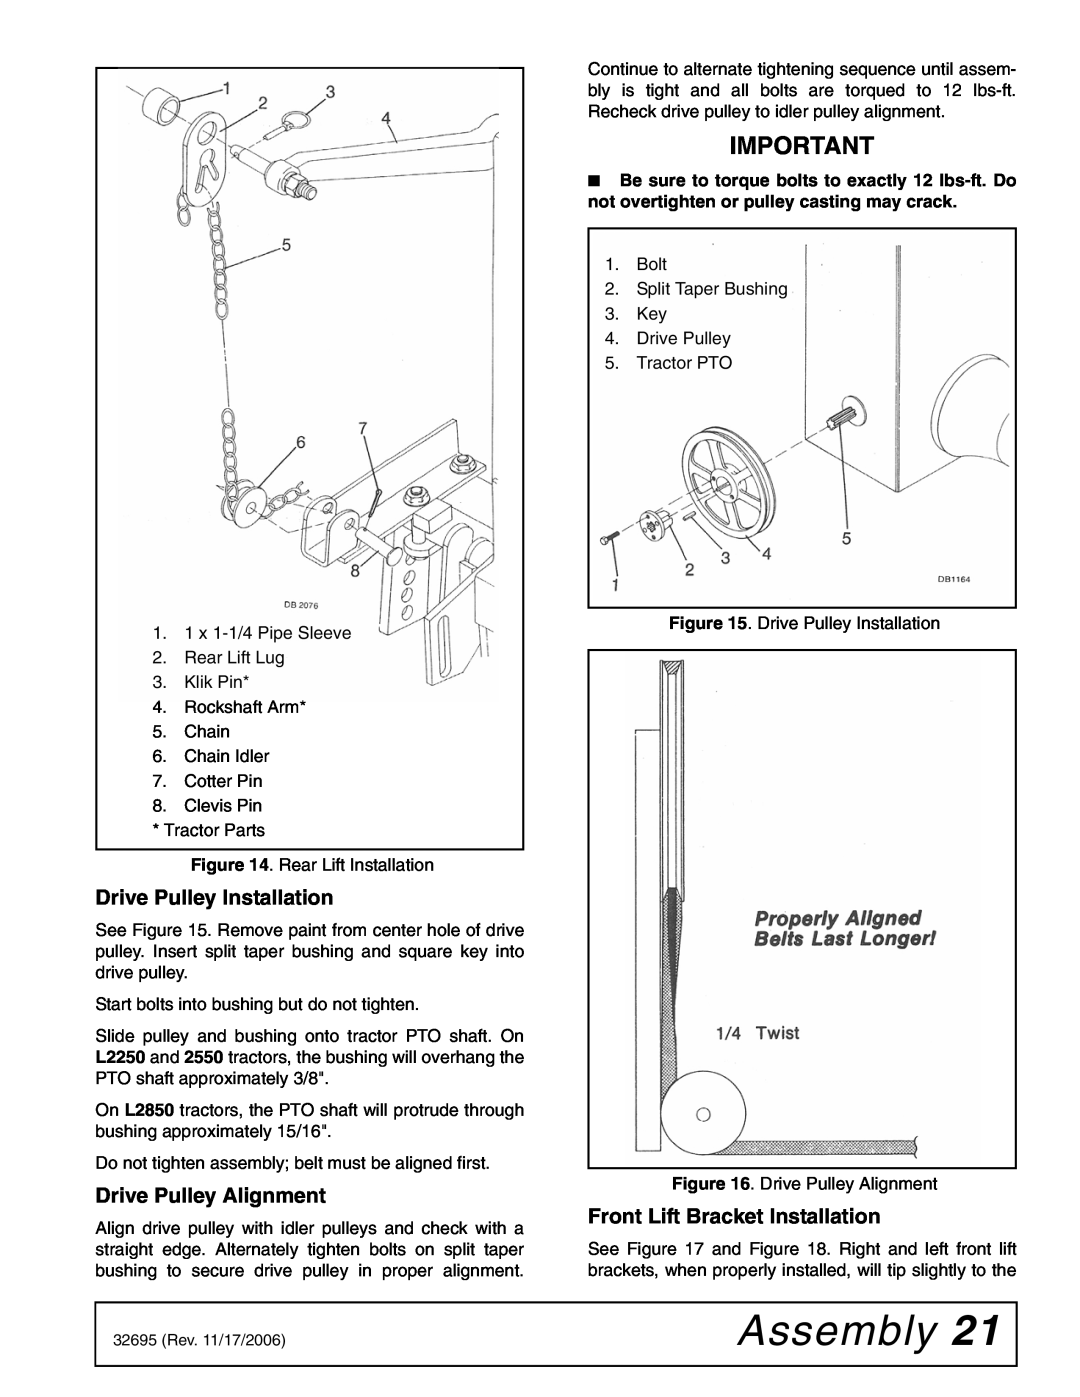 Woods Equipment L306 K50 Drive Pulley Installation, Drive Pulley Alignment, Front Lift Bracket Installation, Assembly 